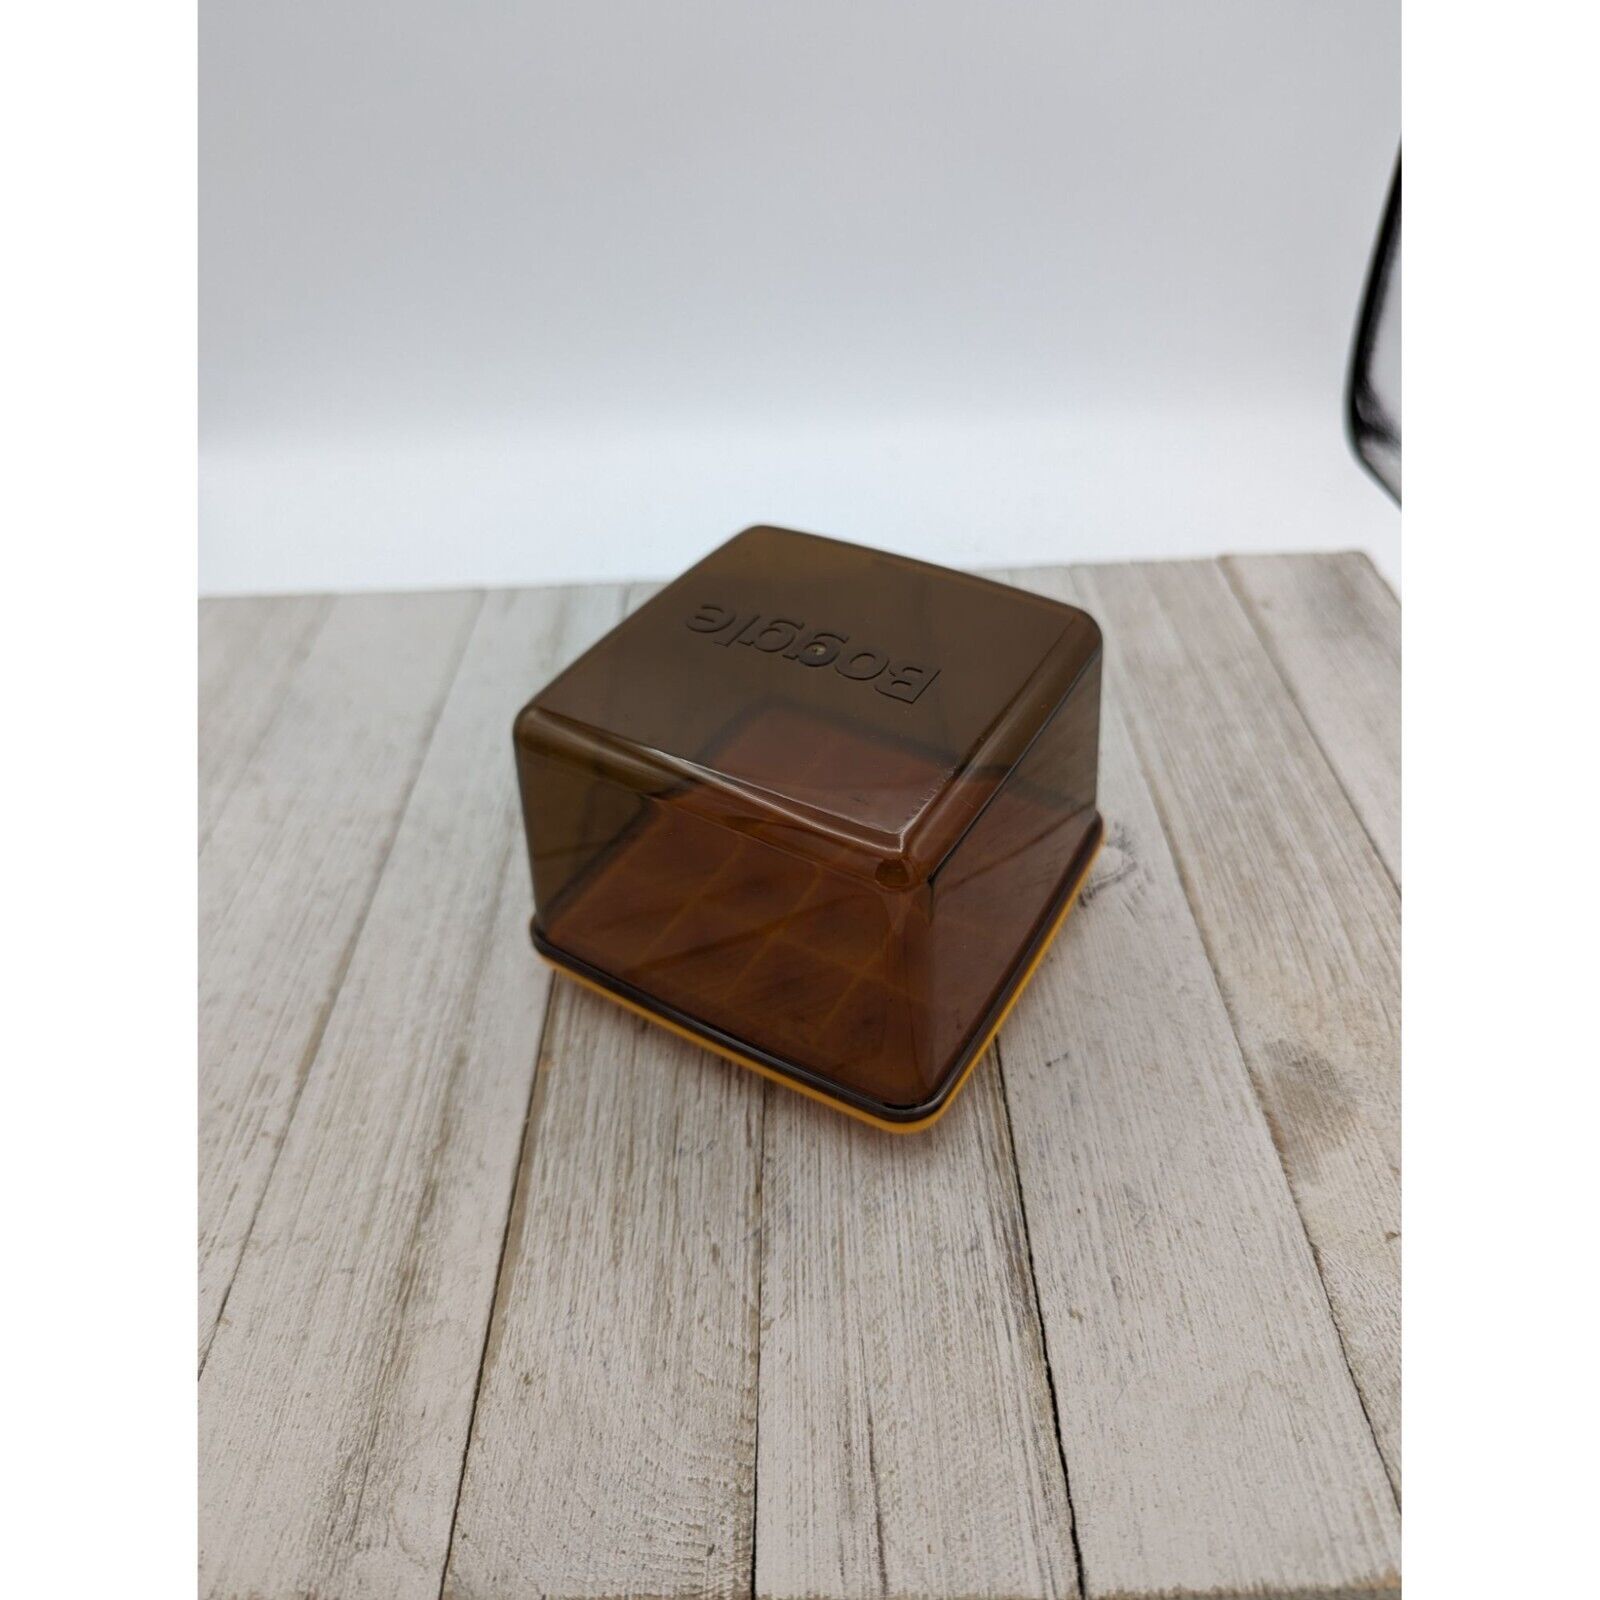 Primary image for BOGGLE Hidden Word Game By Parker Brothers Vintage 1976 Replacement Box Holder